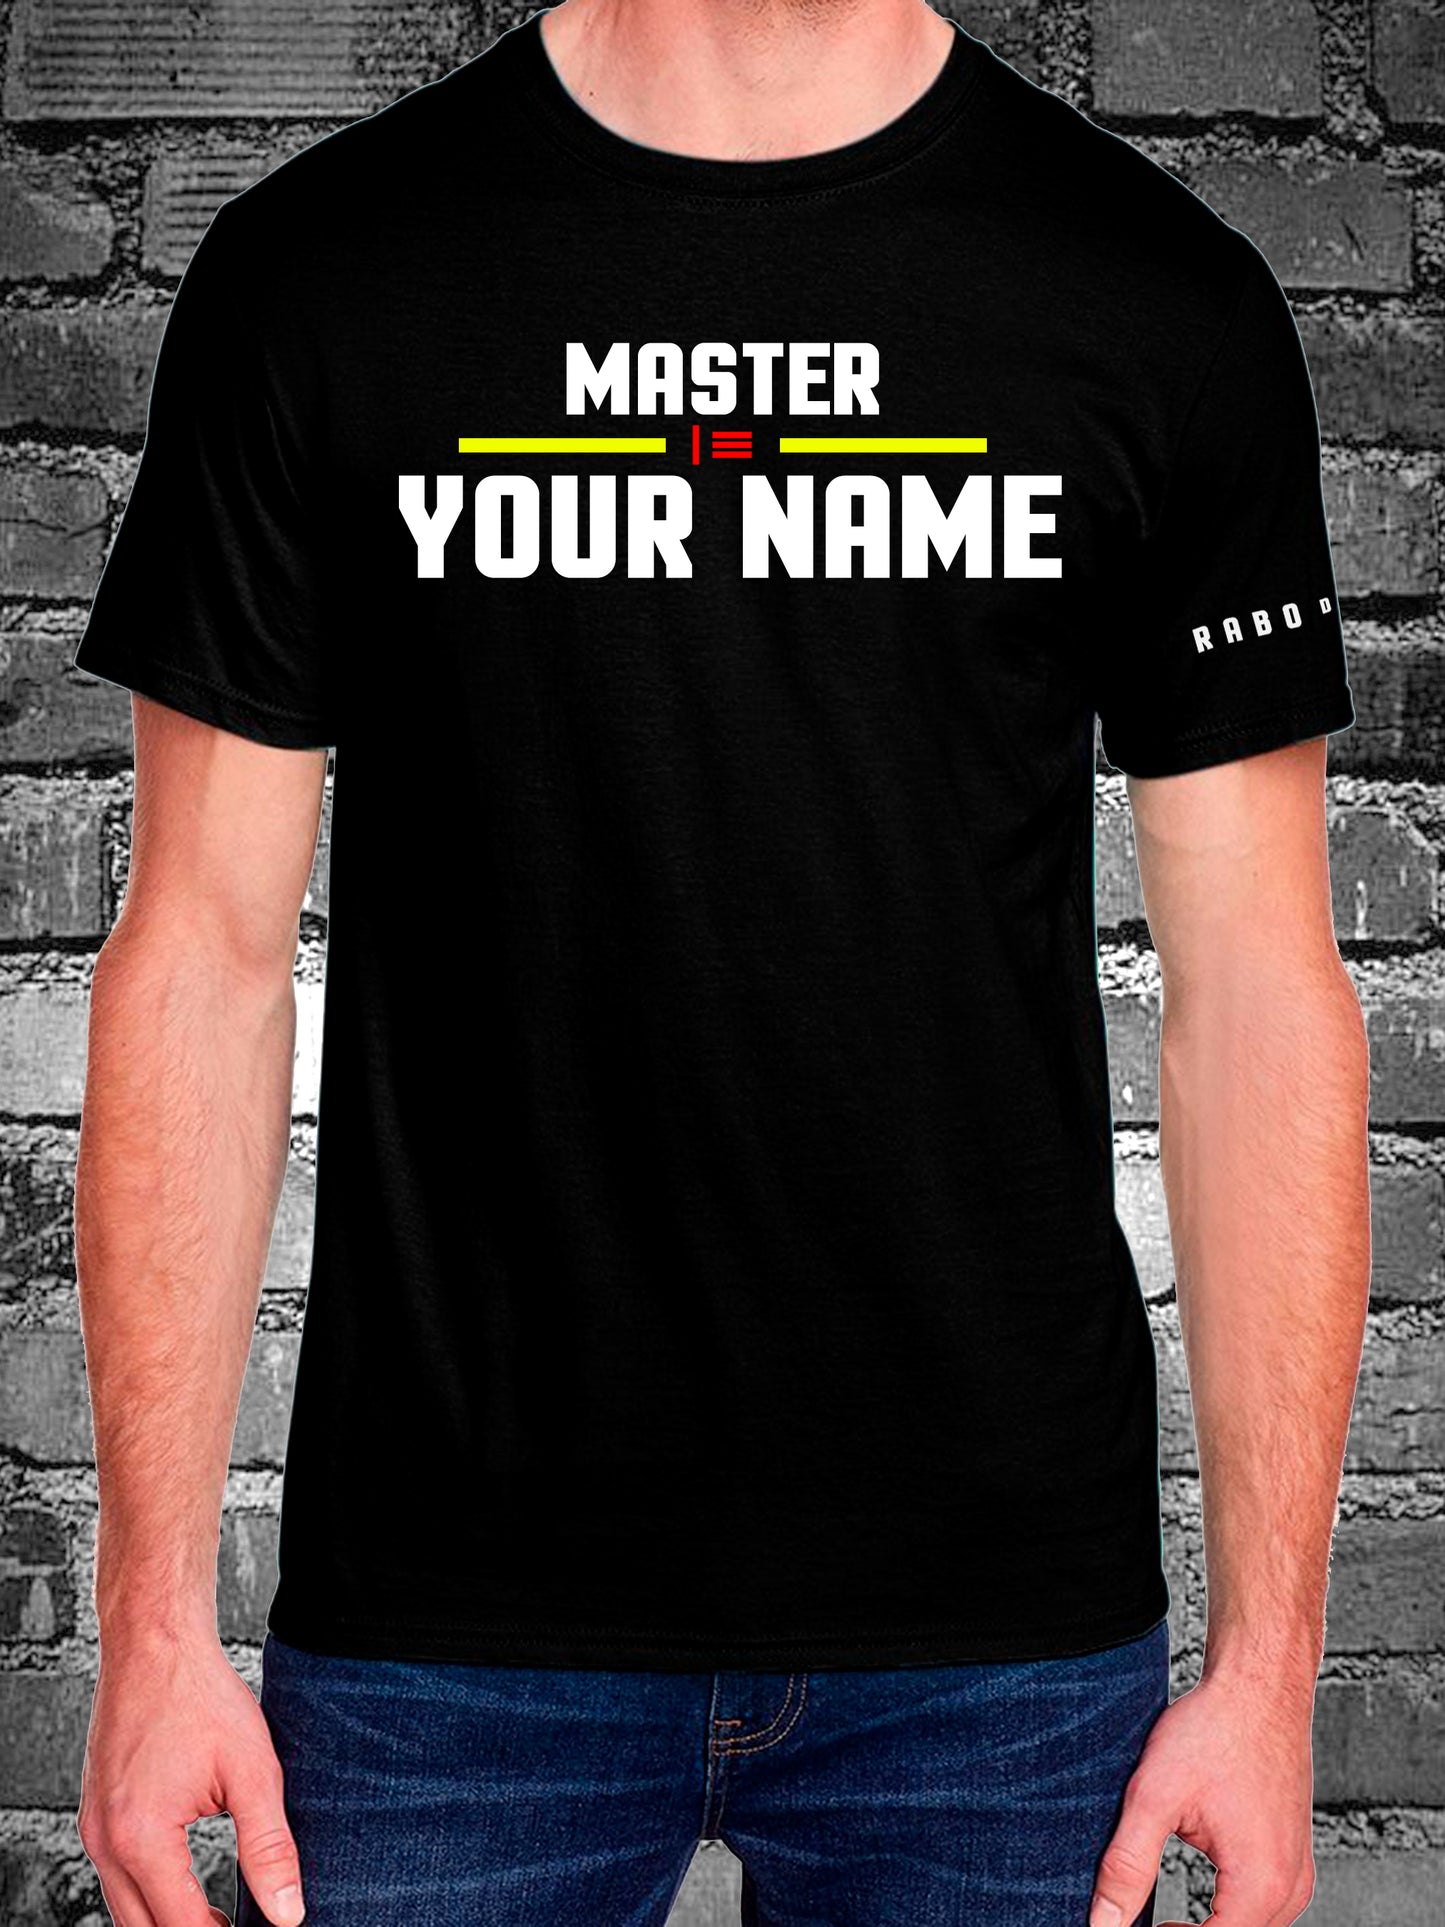 MASTER with CUSTOM name - Black T-Shirt with Hanky Code and Master/Slave Flag detail